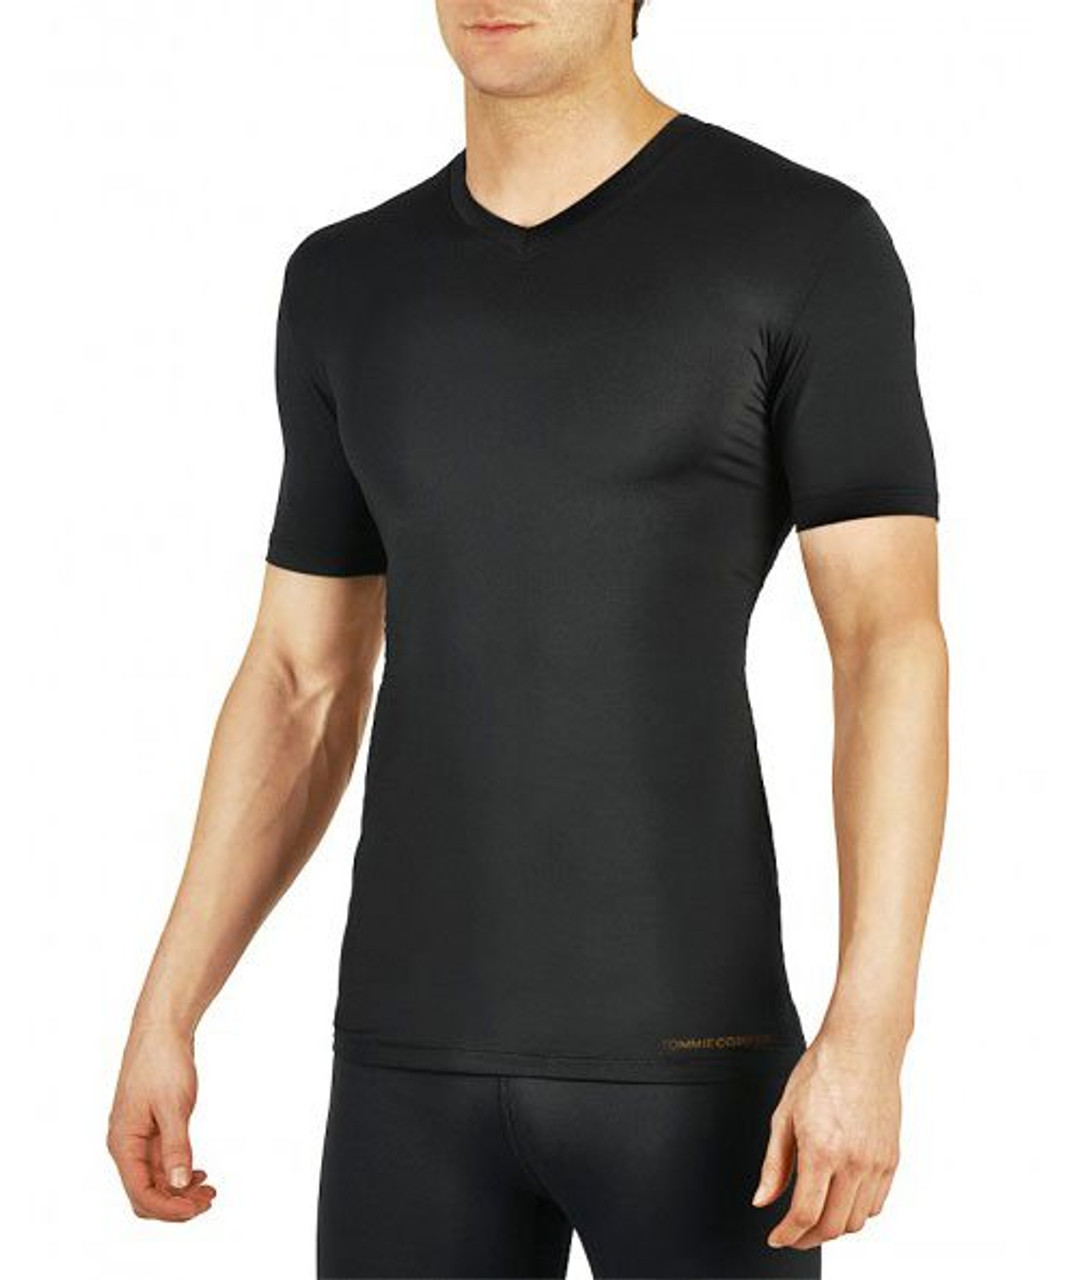 tommy copper compression shirt